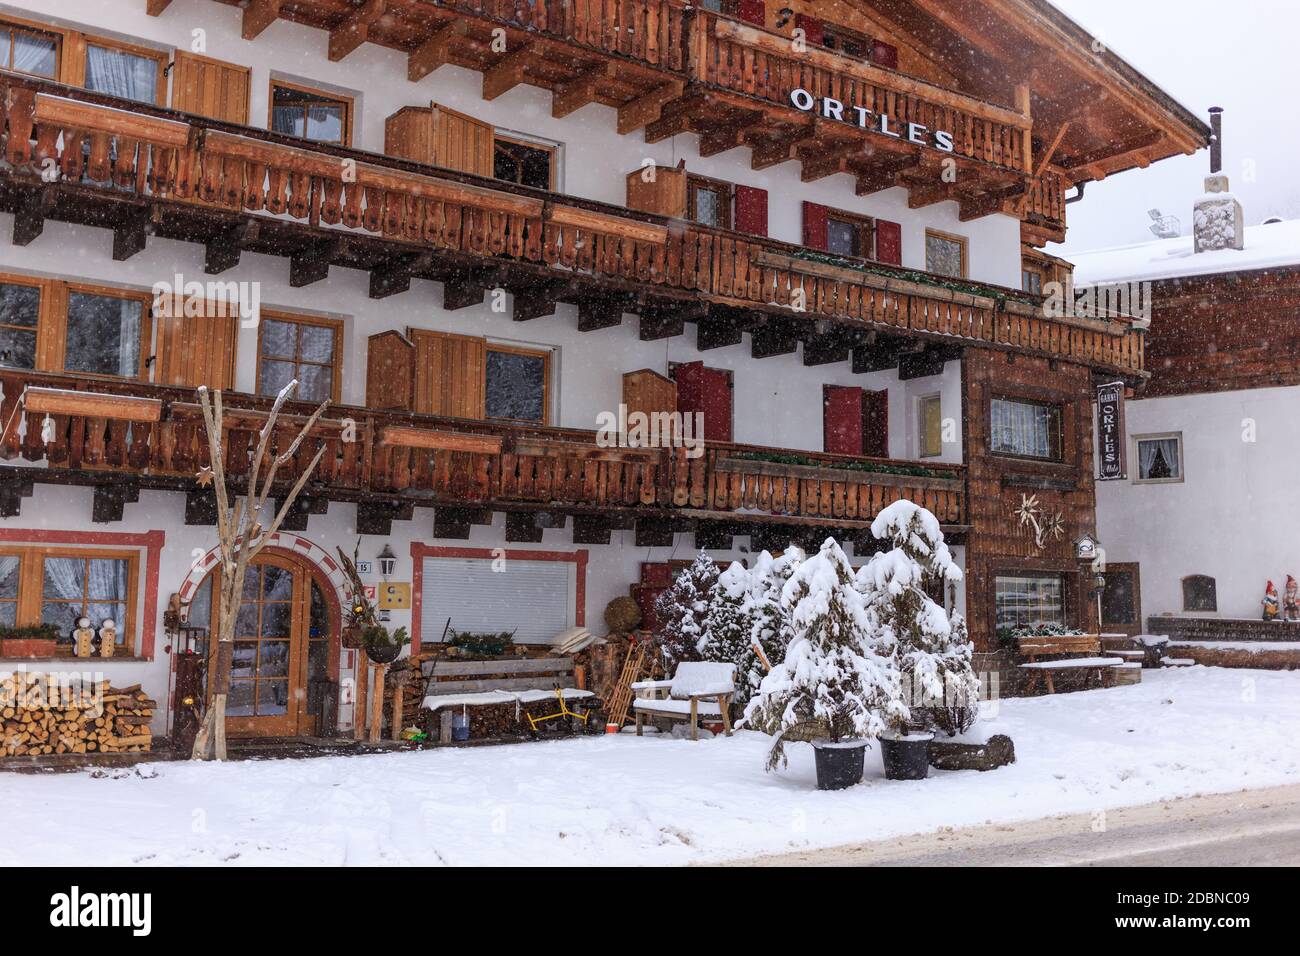 Traditionan Tyrolean hotel on an overcast and snowy day, Selva Gardena, Dolomites, Italy Stock Photo